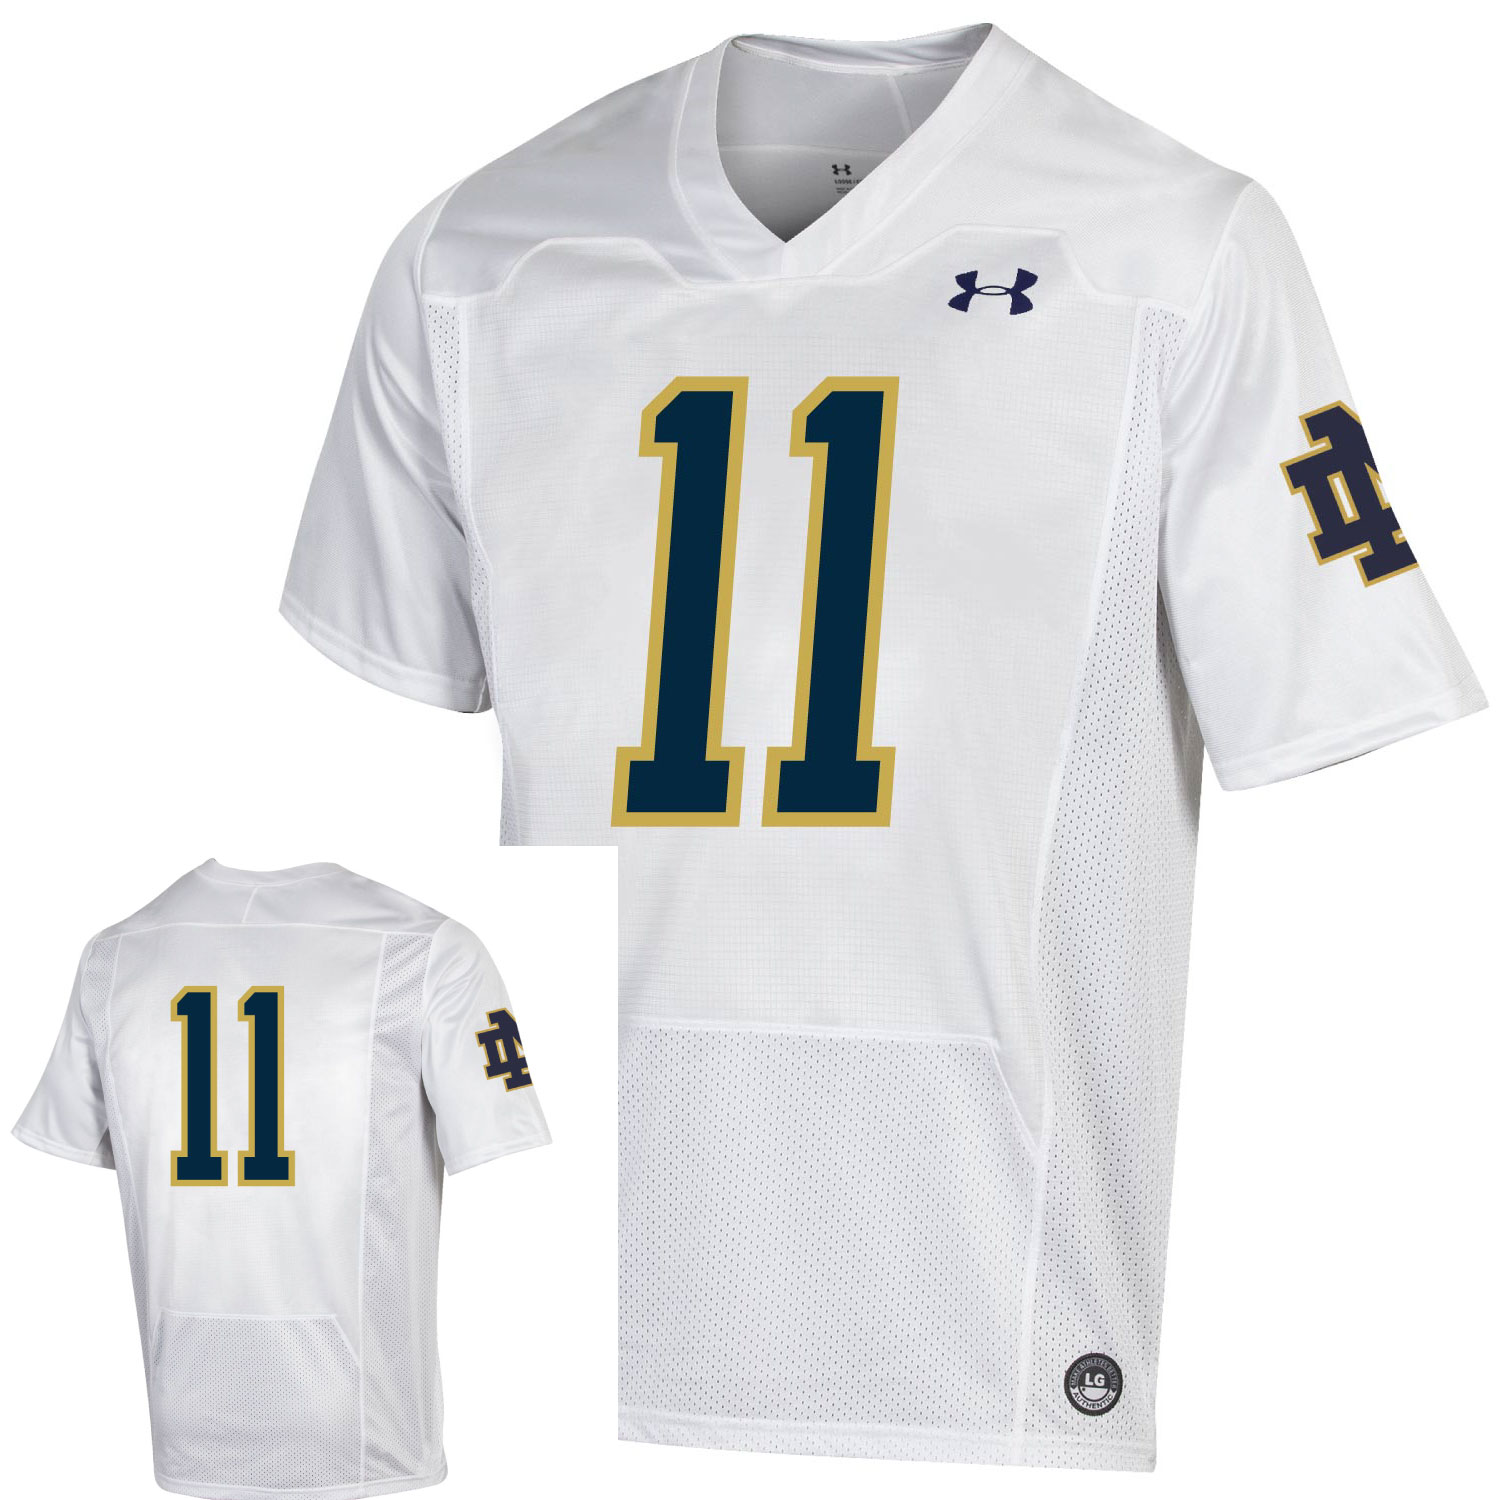 Under Armour Notre Dame Fighting Irish UA #11 ArmourGrid 2.0 Replica Football Jersey